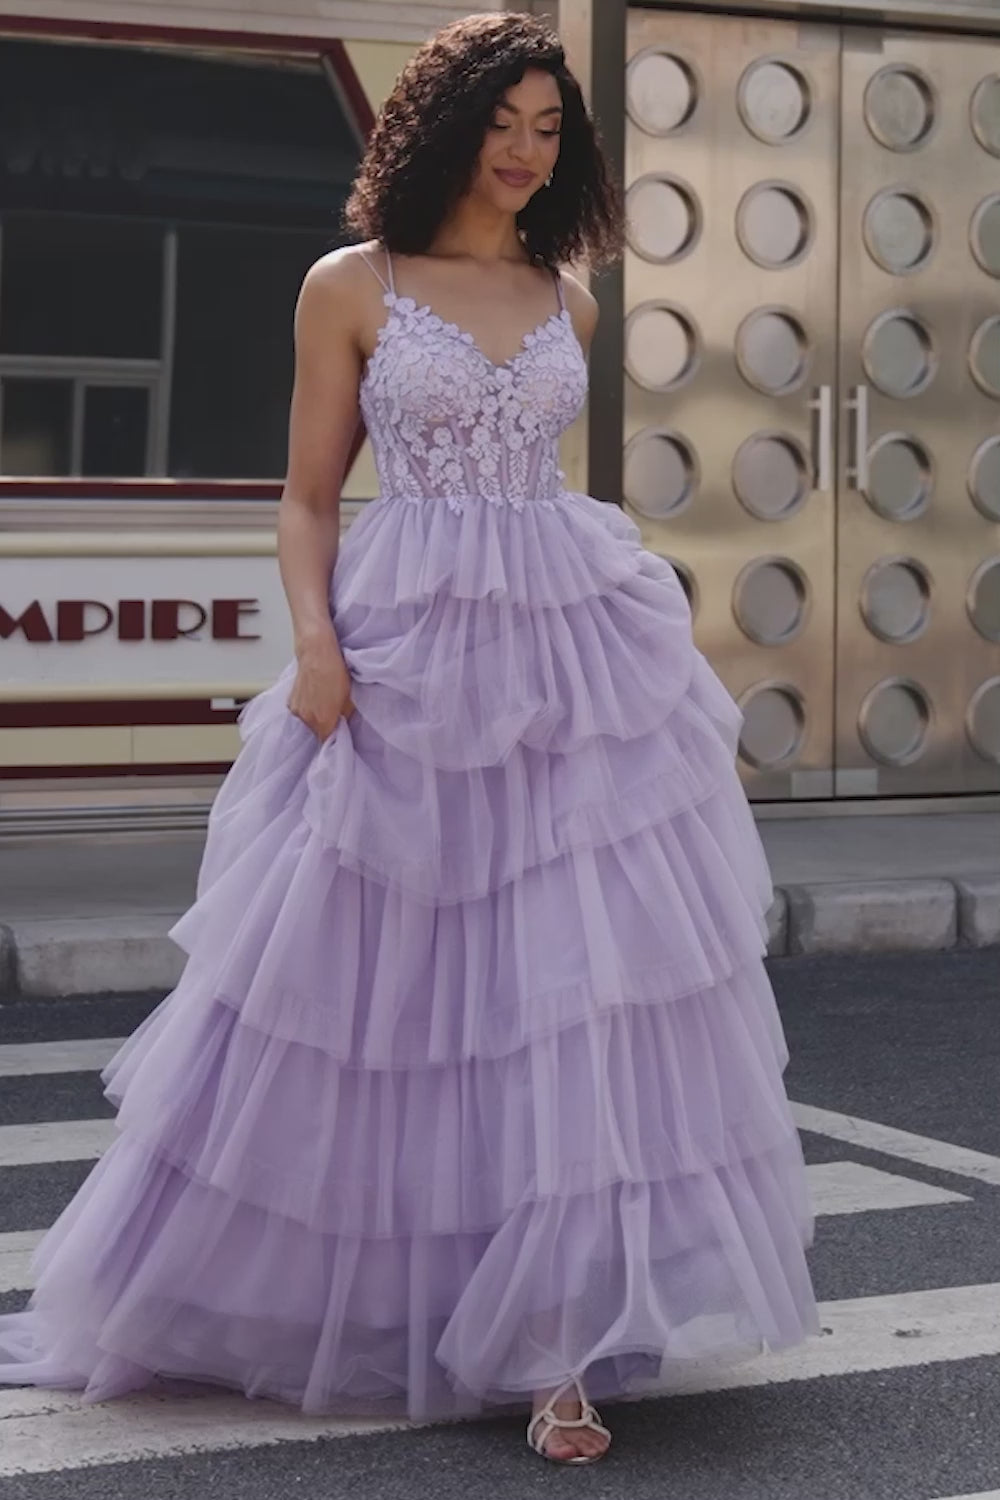 Lilac Tulle Tiered Princess Corset Prom Dress with Appliques